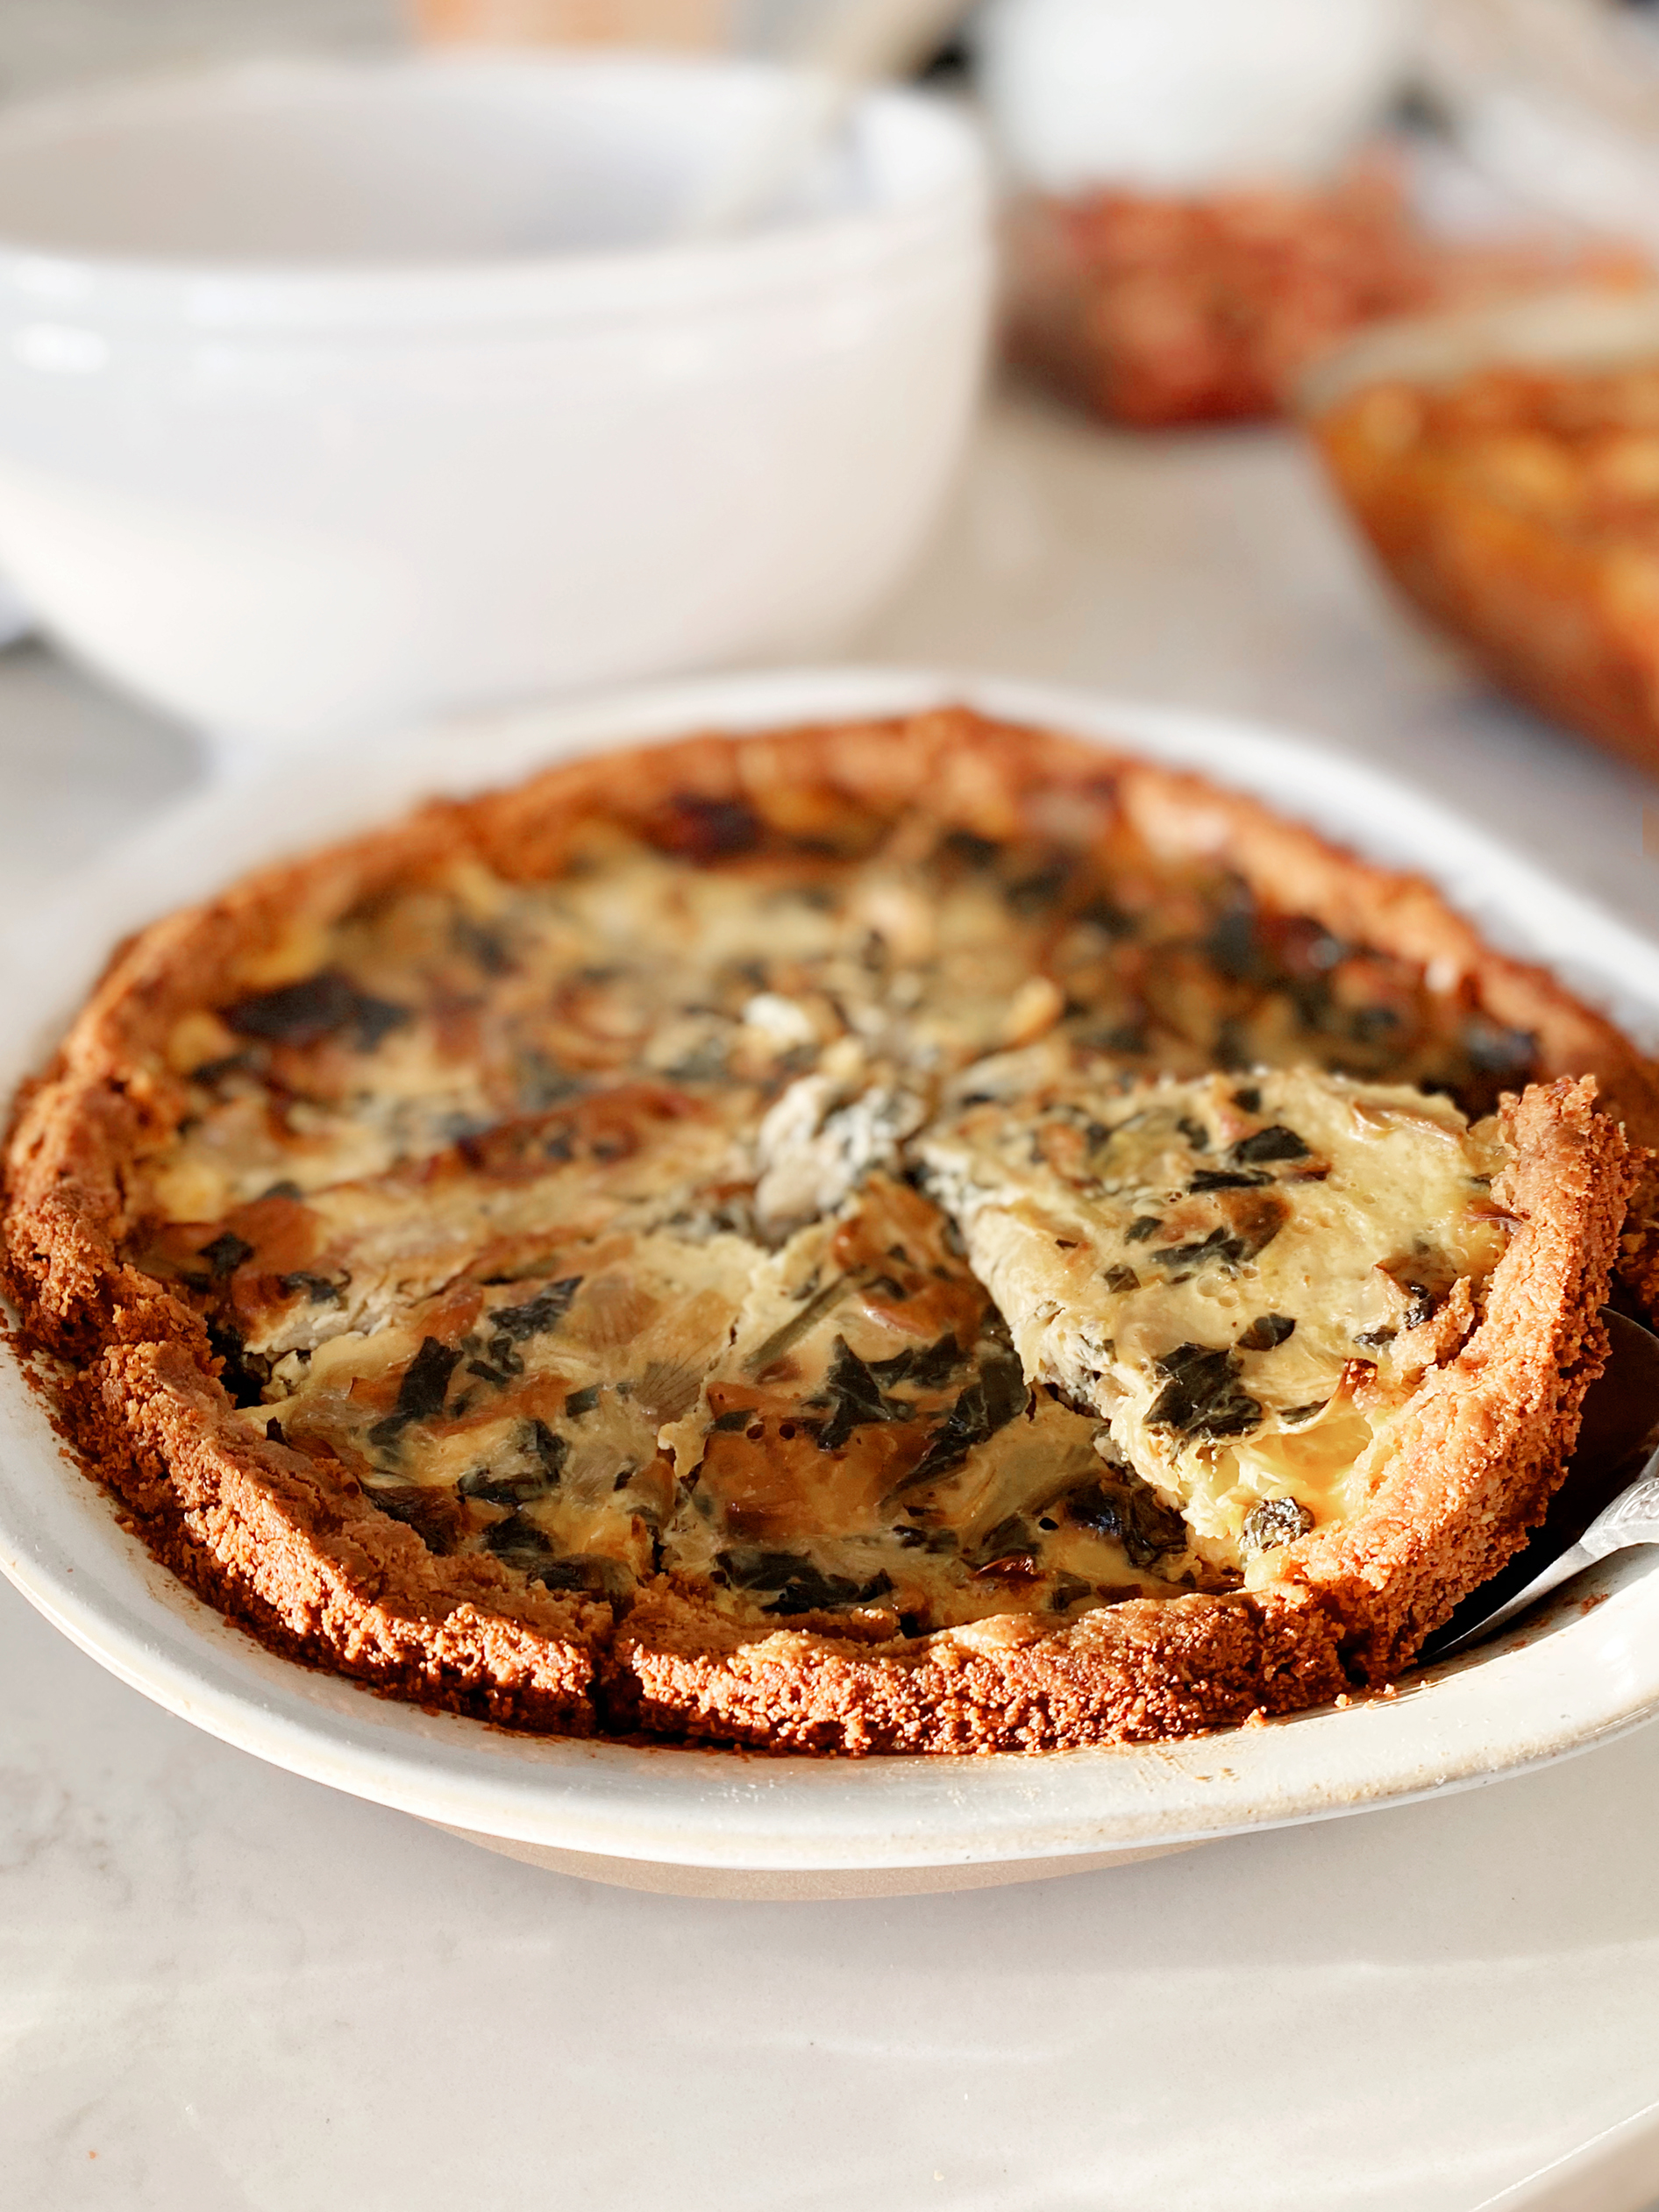 WHOLE FOODS MARKET QUICHE MUSHROOM & FONTINA CHEESE, 32 oz at Whole Foods  Market